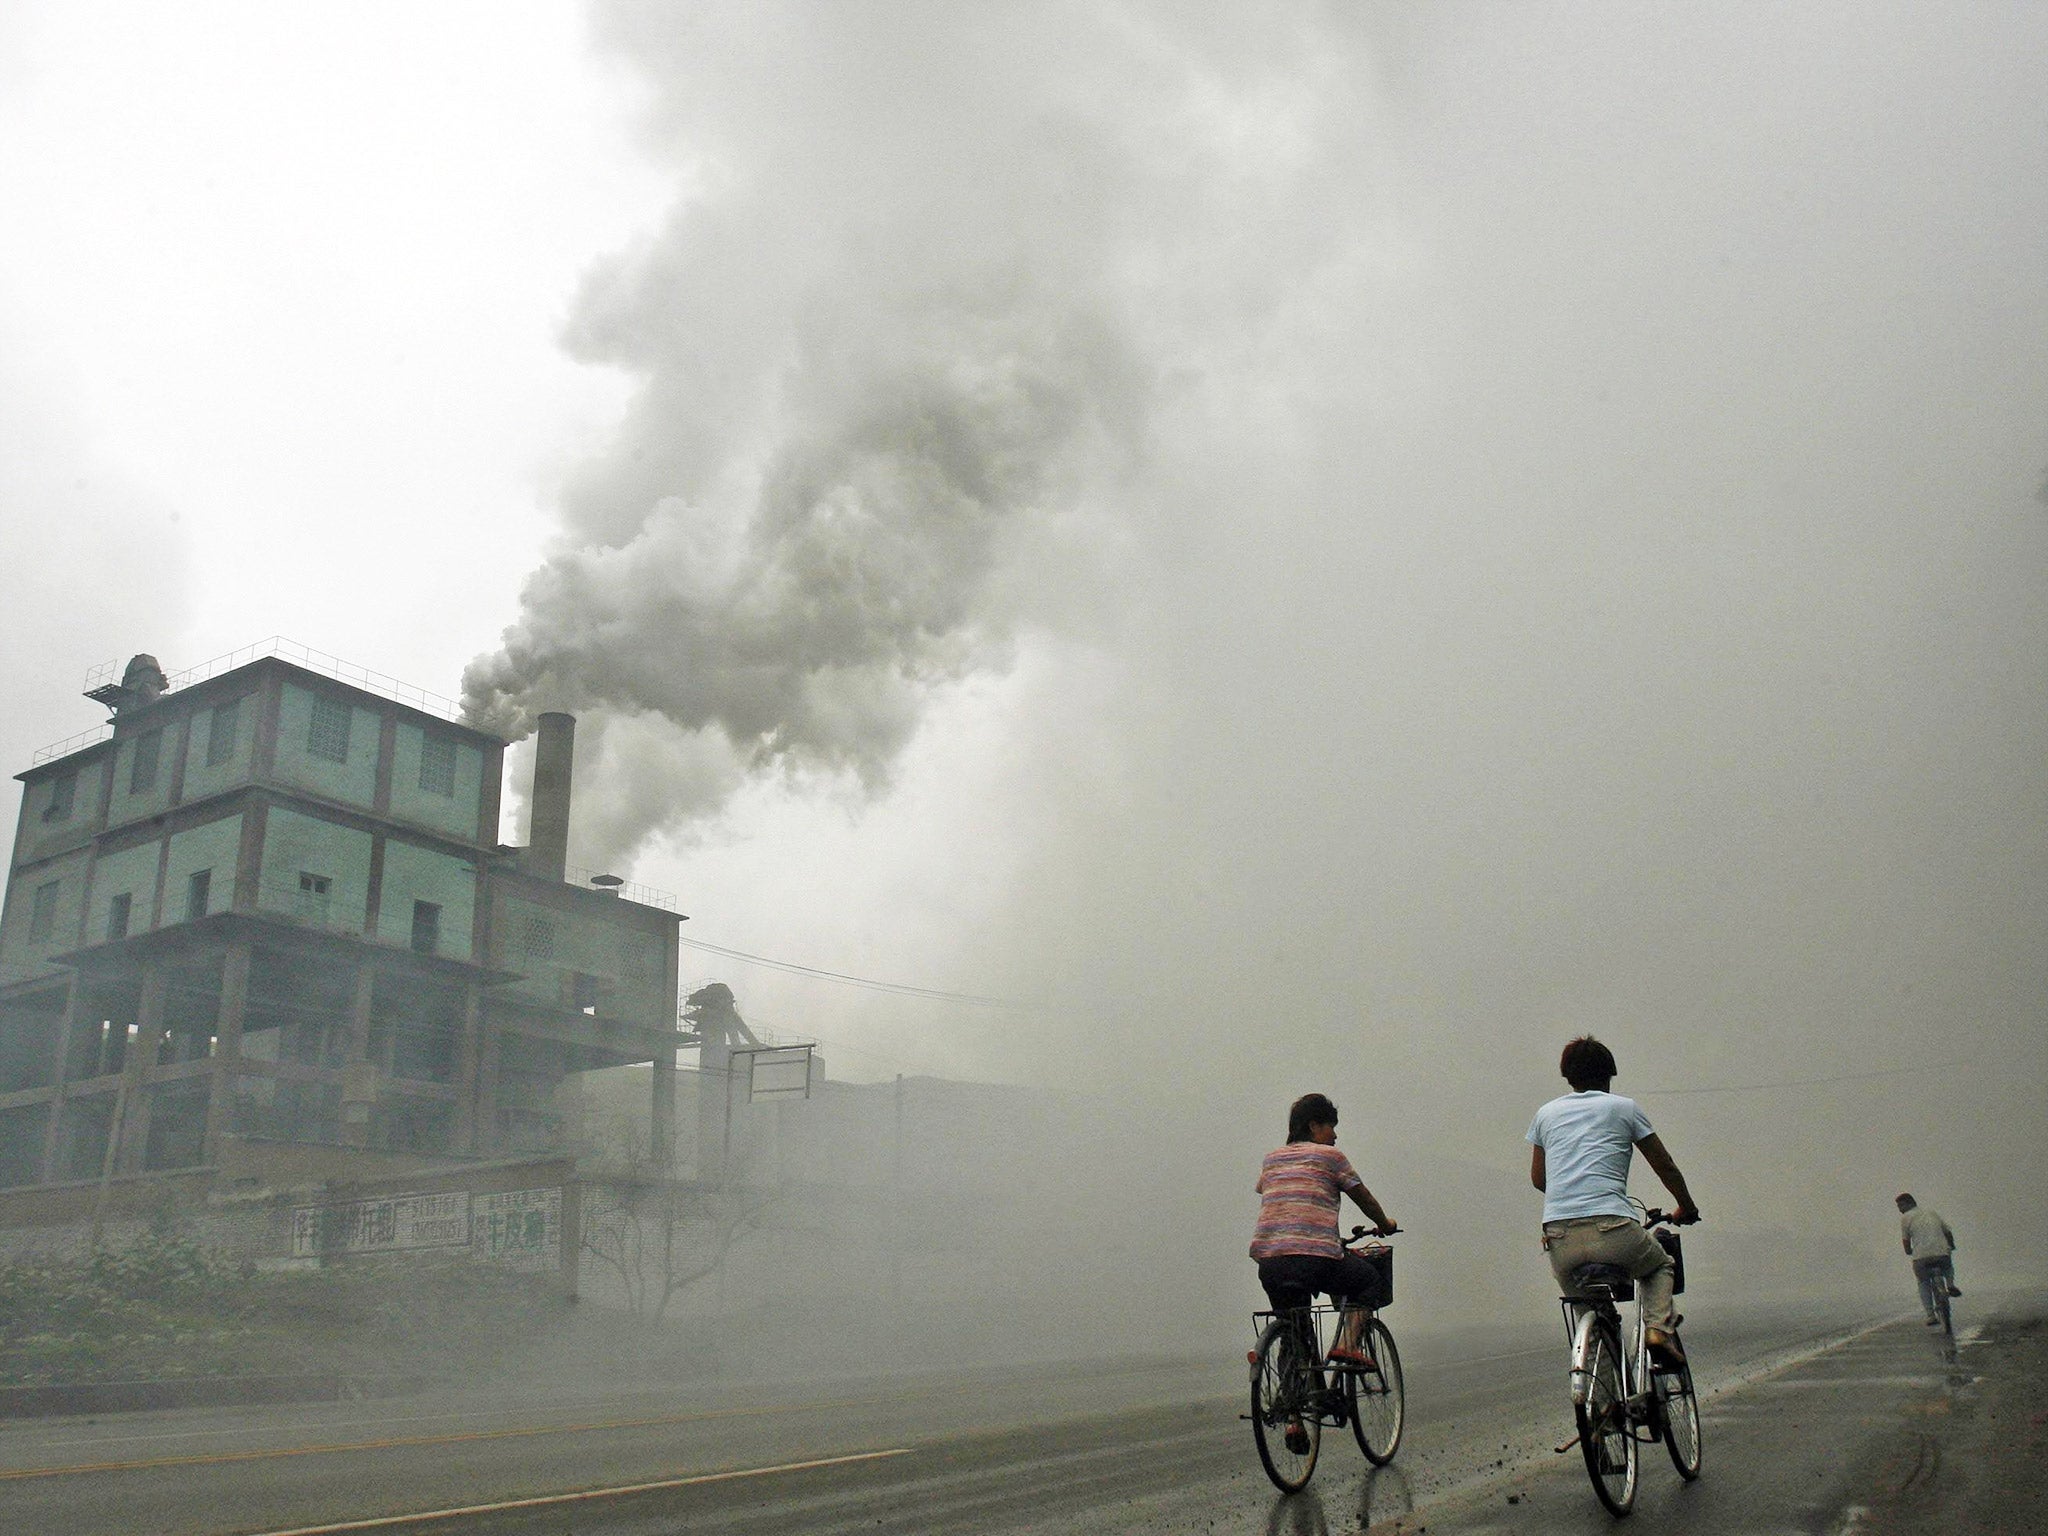 Stock image showing thick pollution from a factory in Yutian, 100km east of Beijing, China